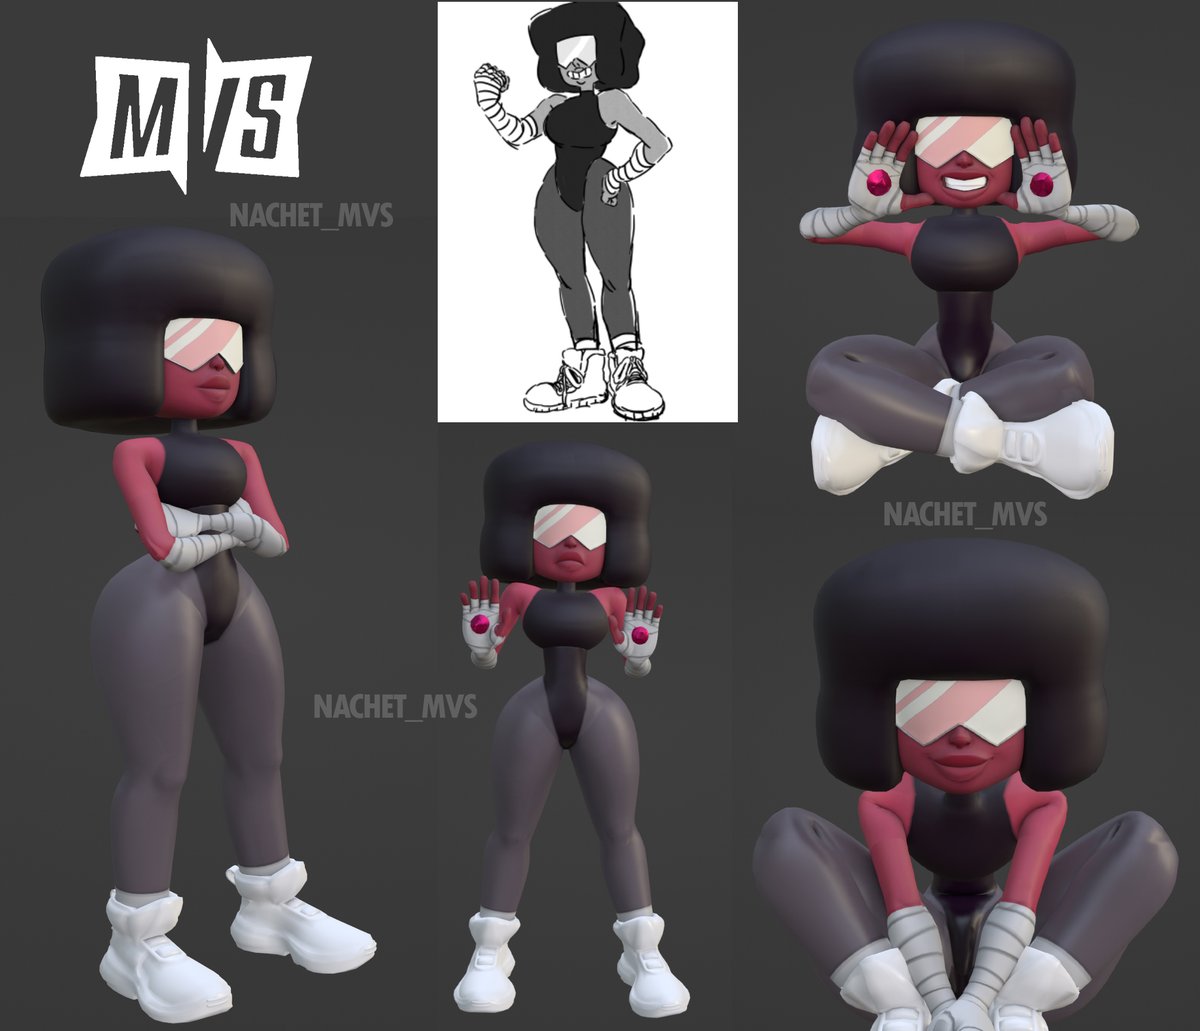 I've been playing around with Garnet's model and I made a variant based on this art by Leiana Nitura Hope you all like it! #Multiversus #StevenUniverse